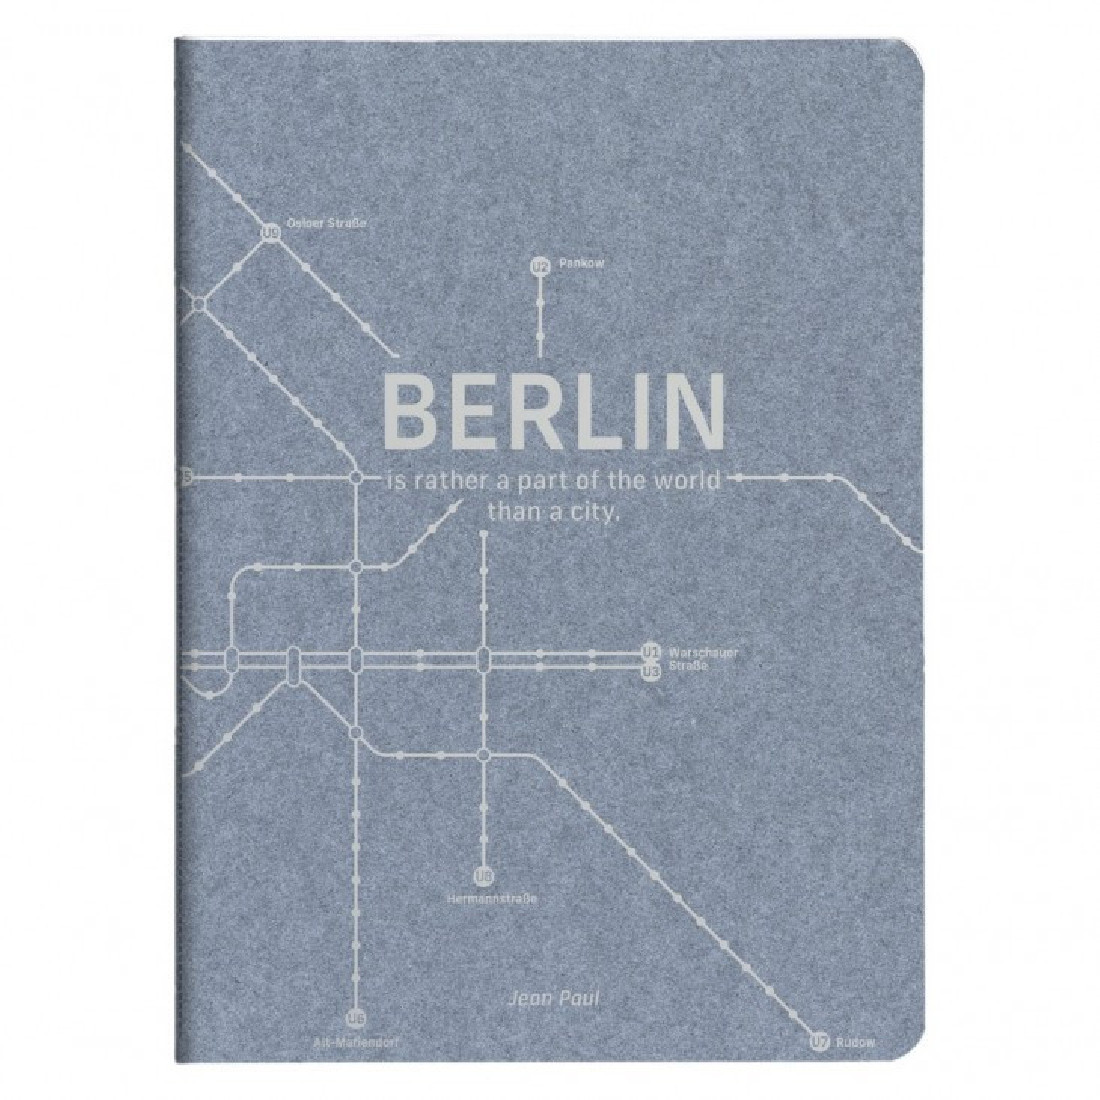 Clairefontaine Rhodia Jeans notebook A4 21x29,7cm, Berlin metro, 90gr, lined, 96 pages, 083532